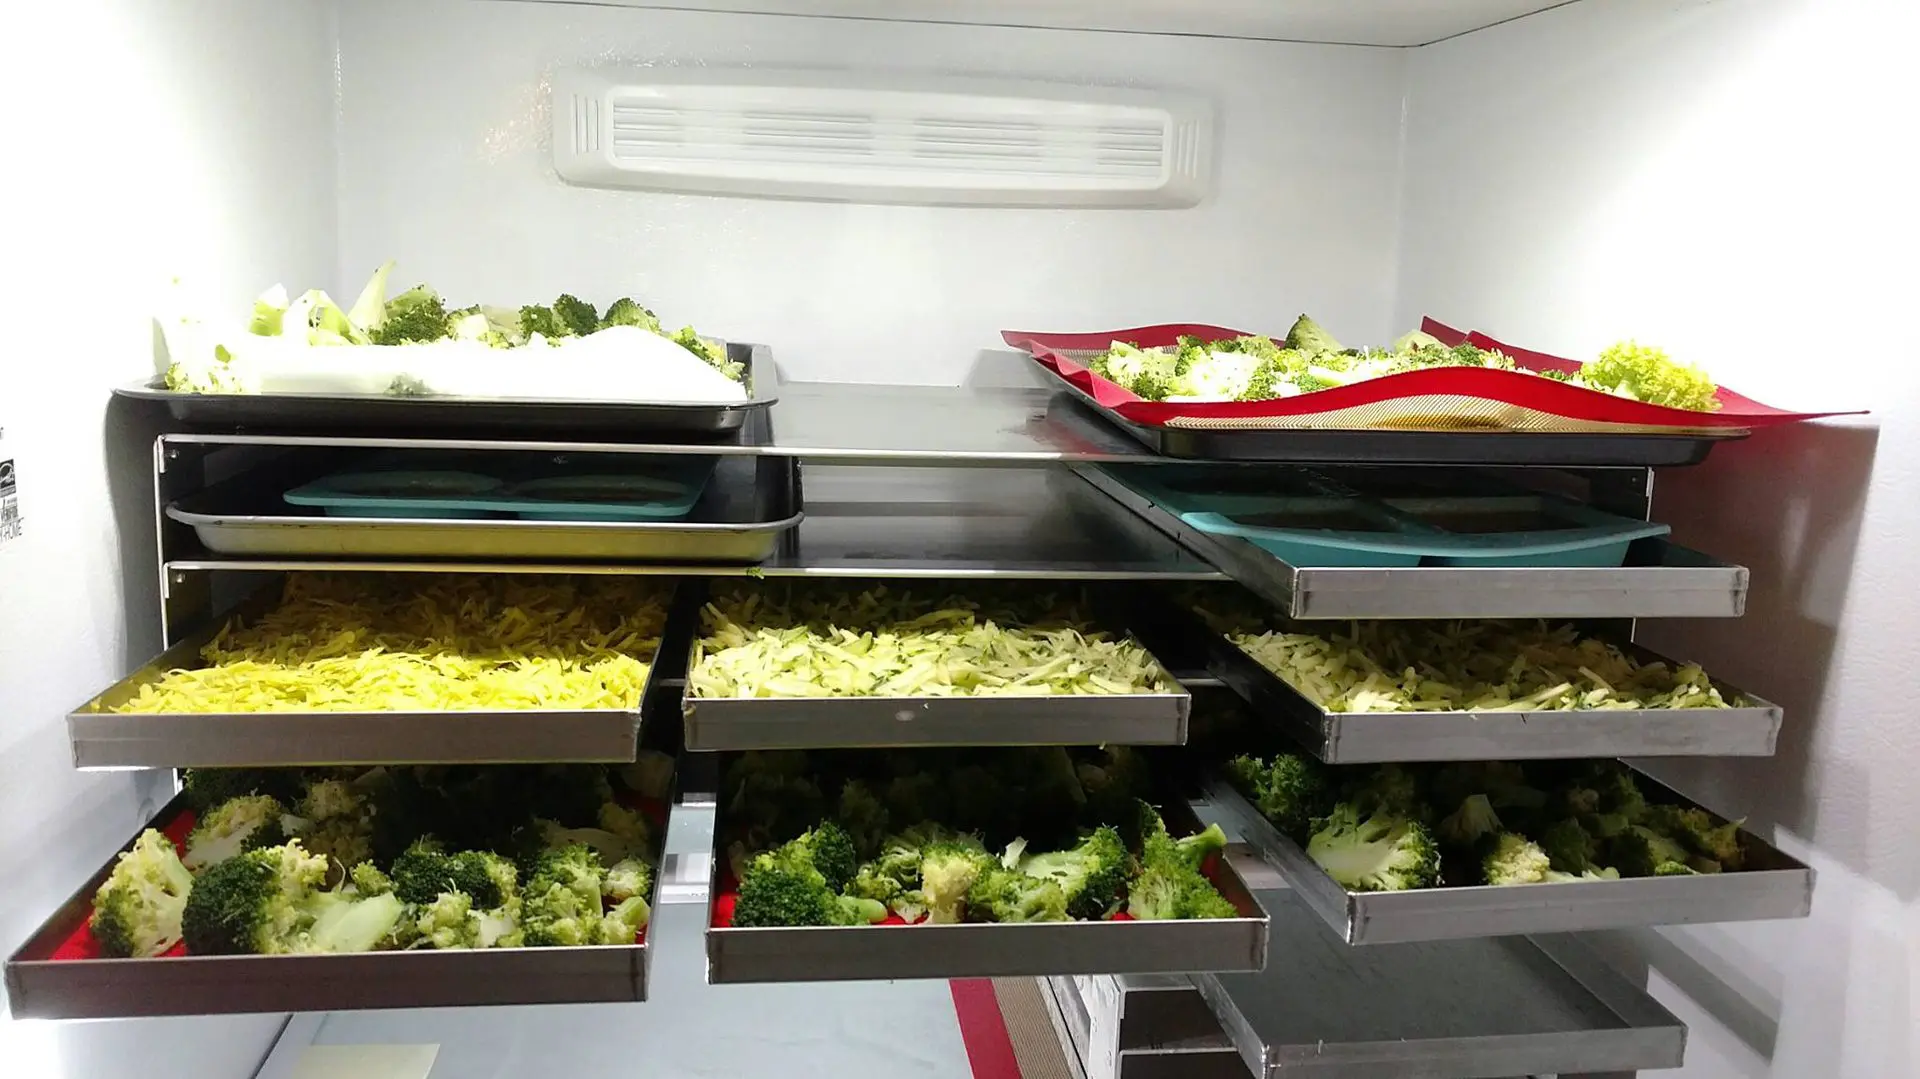 A kitchen with trays of broccoli and other vegetables.